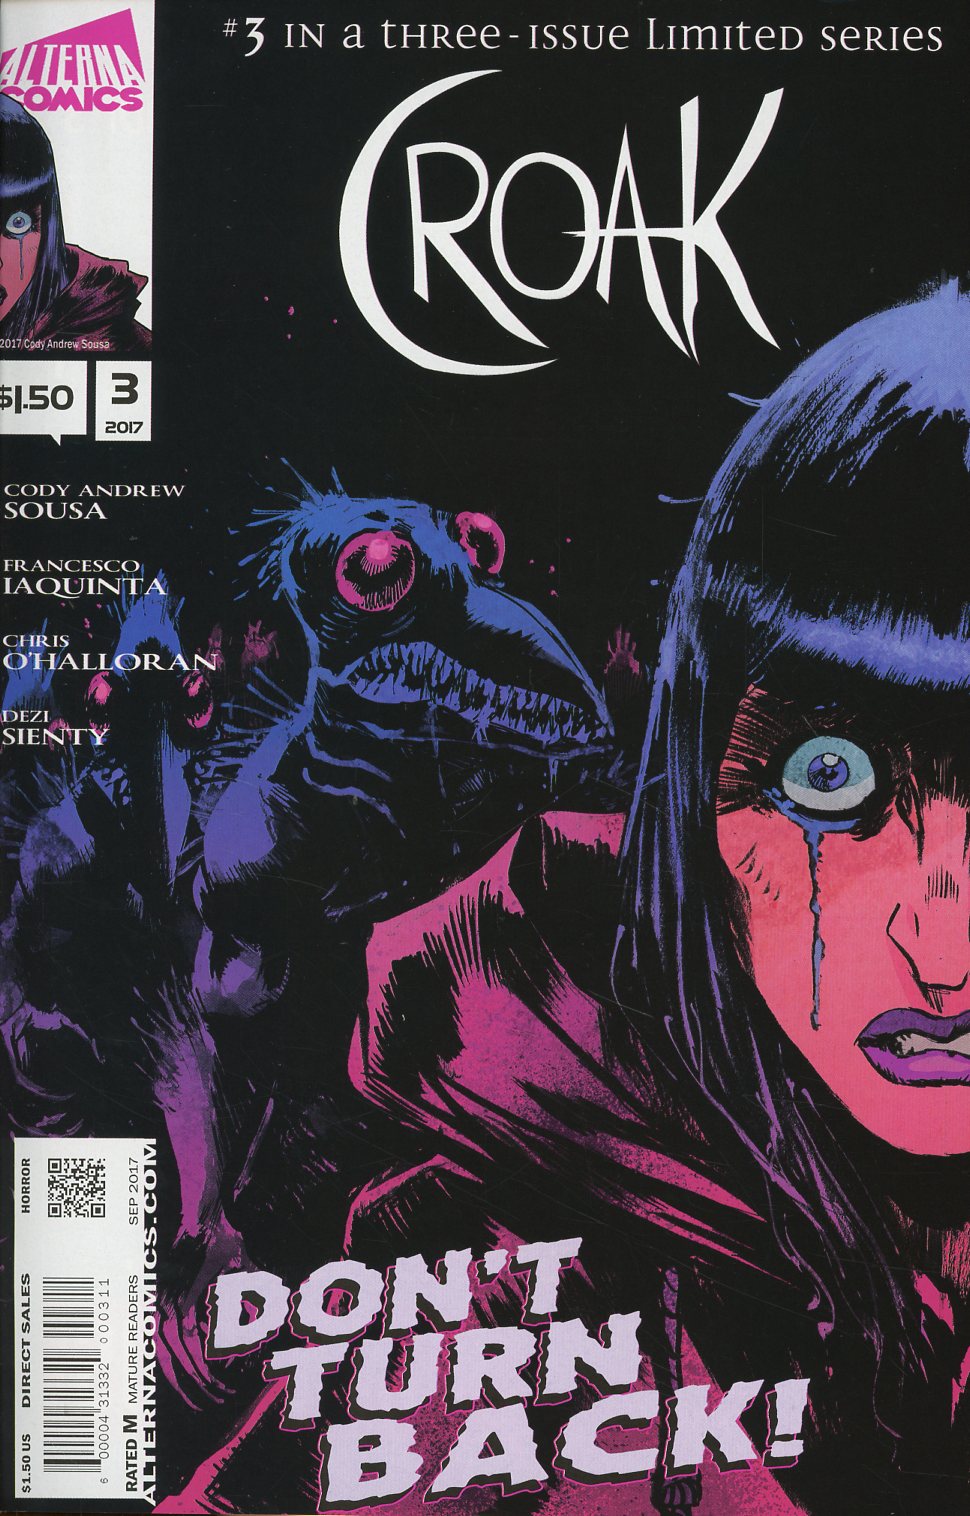 Croak (Alterna Comics) #3 RECOMMENDED_FOR_YOU